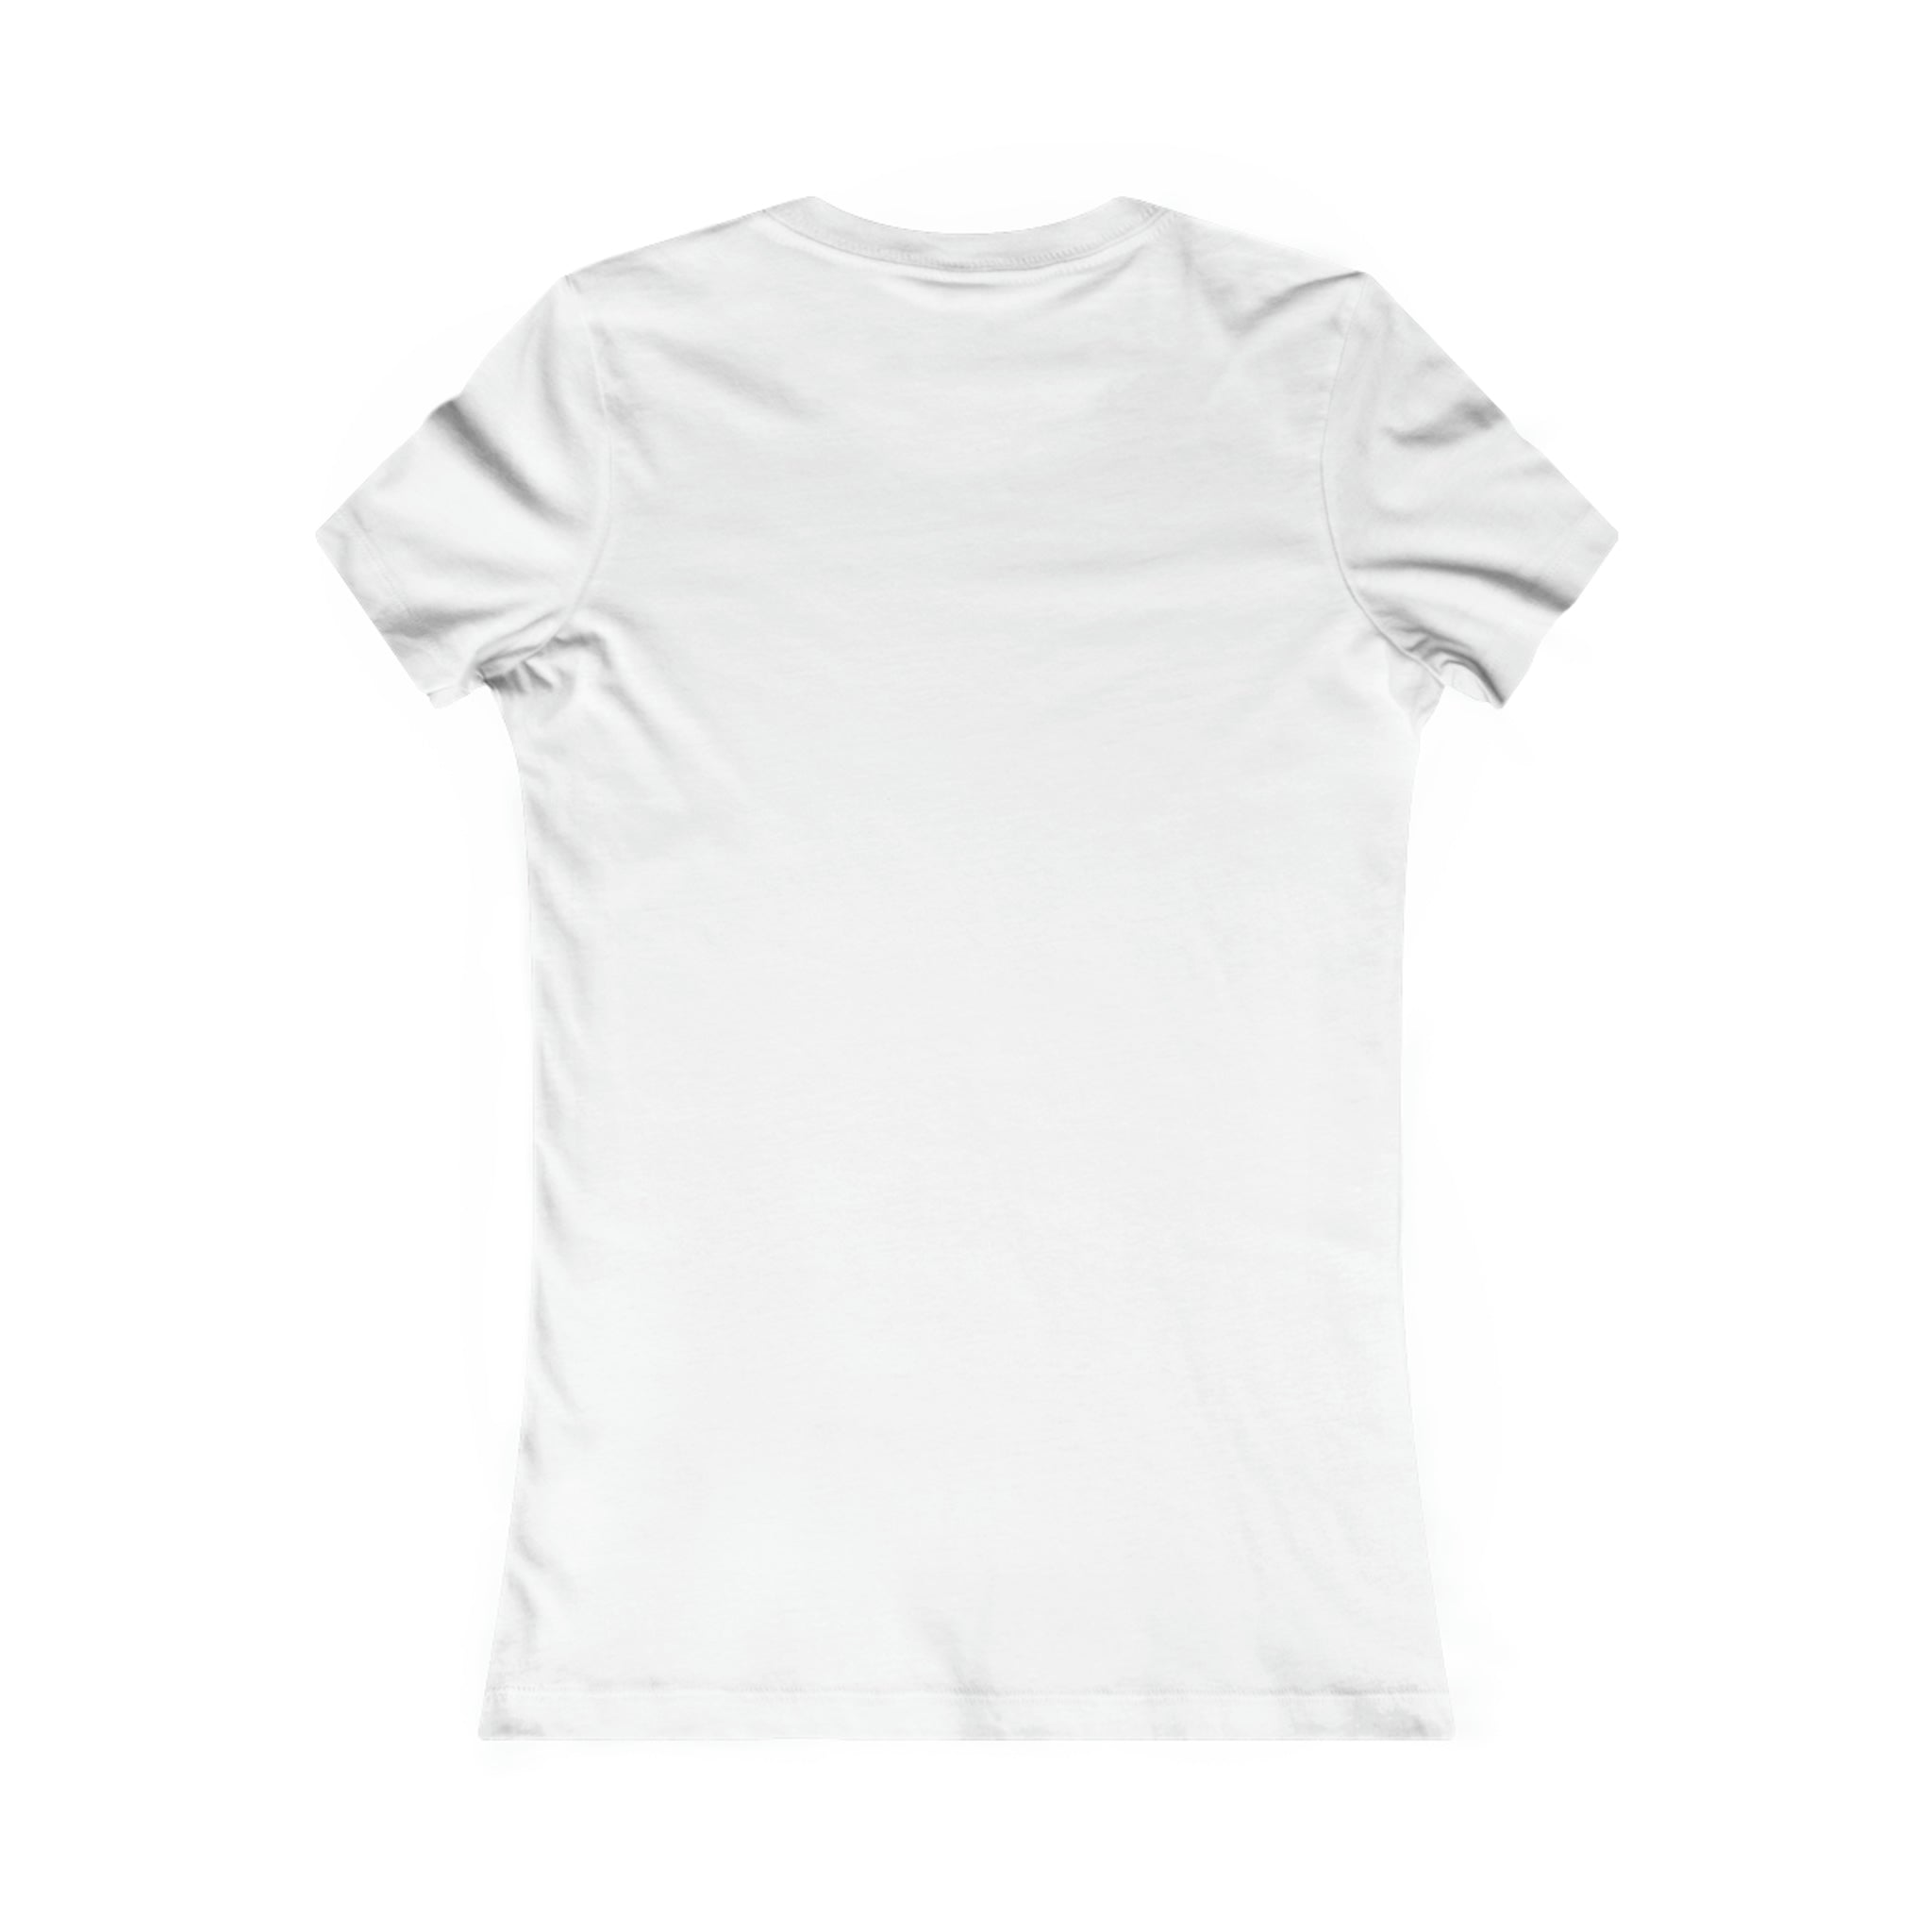 "Started from the Bottom Now We Here" Drizzy-Inspired Women's Favorite Tee - Empowering Lyric Tee for Aspiring Achievers